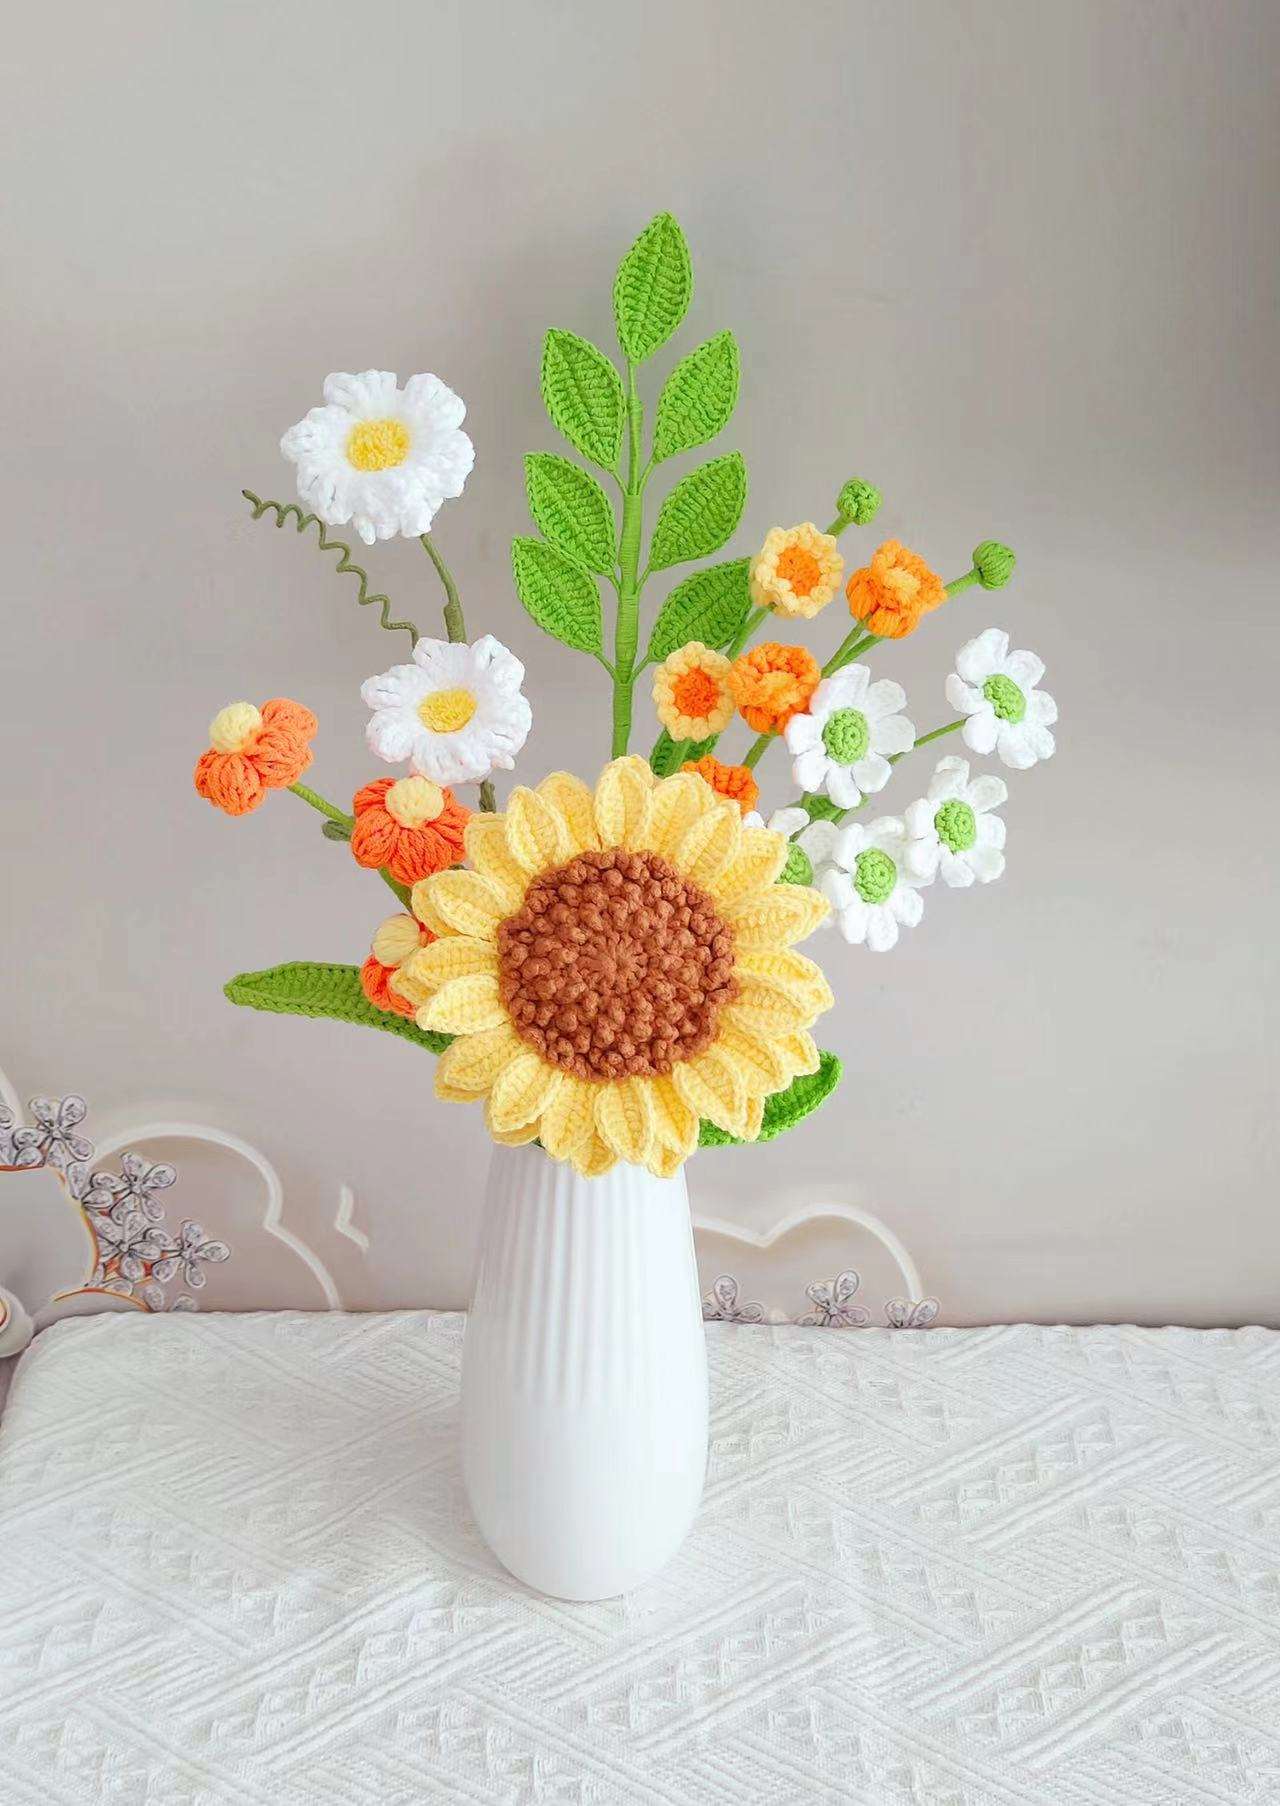 Handcrafted Sunflower Decorative Bouquet for Nature-inspired Decor